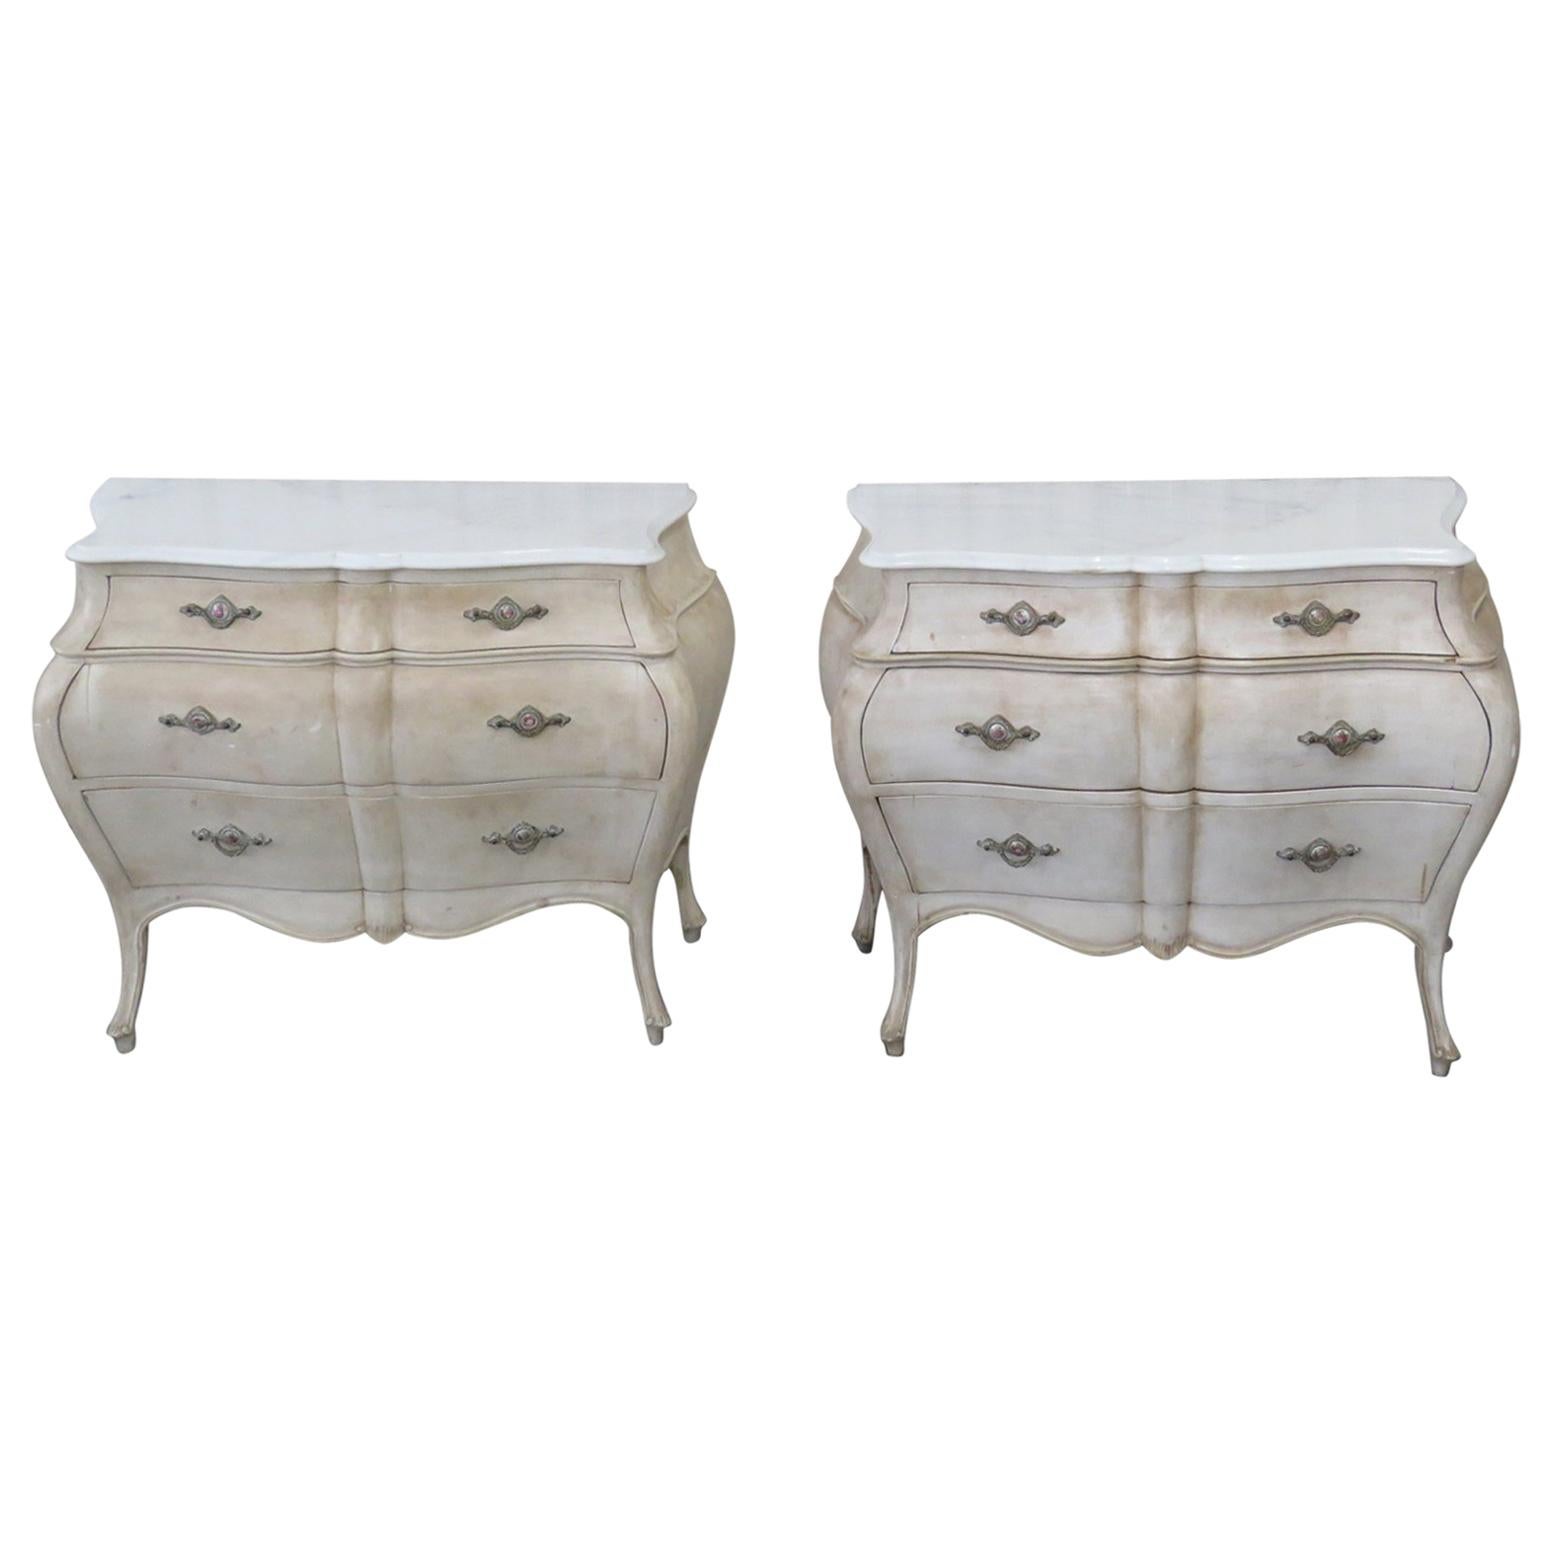 Pair of Painted Swedish Style Bombe Commodes Dressers Nightstands